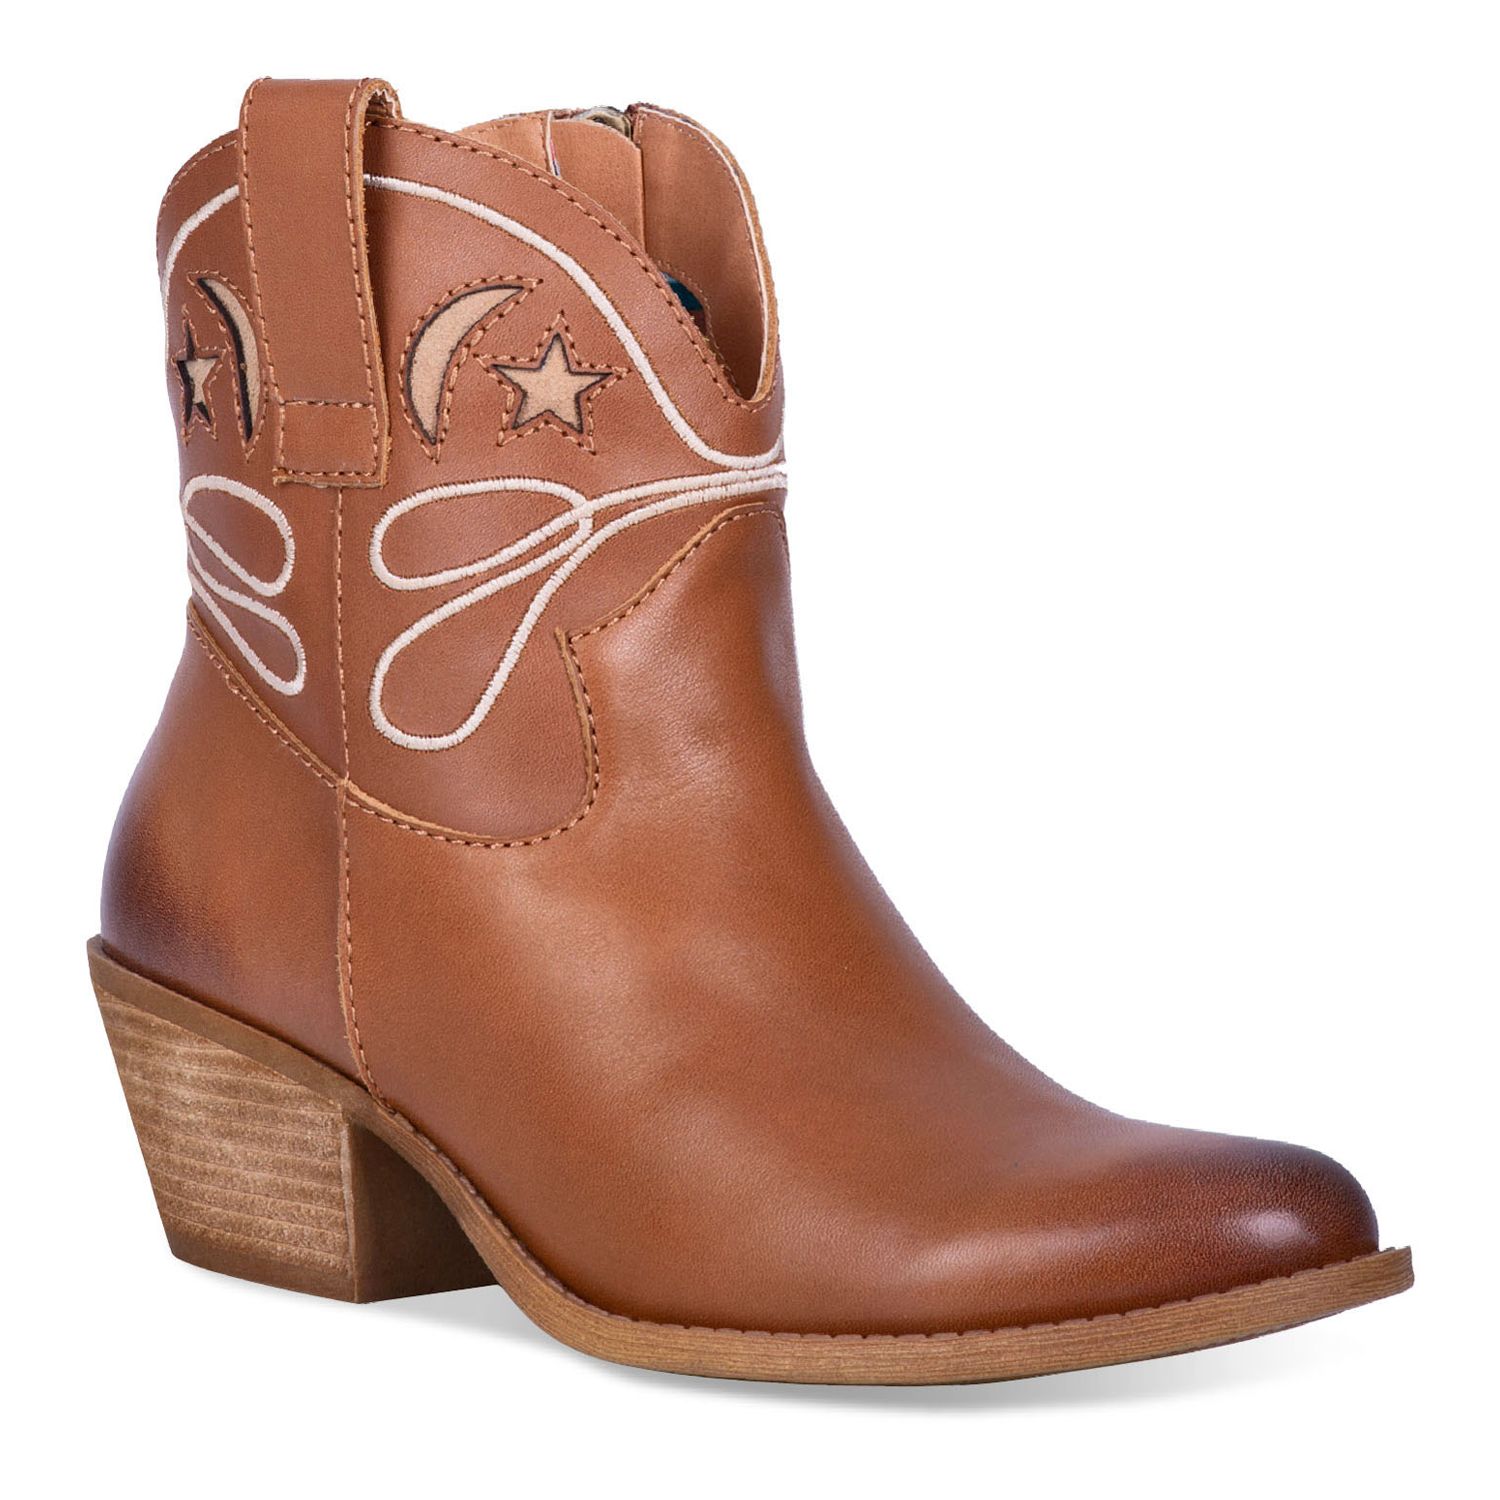 kohls cowgirl boots